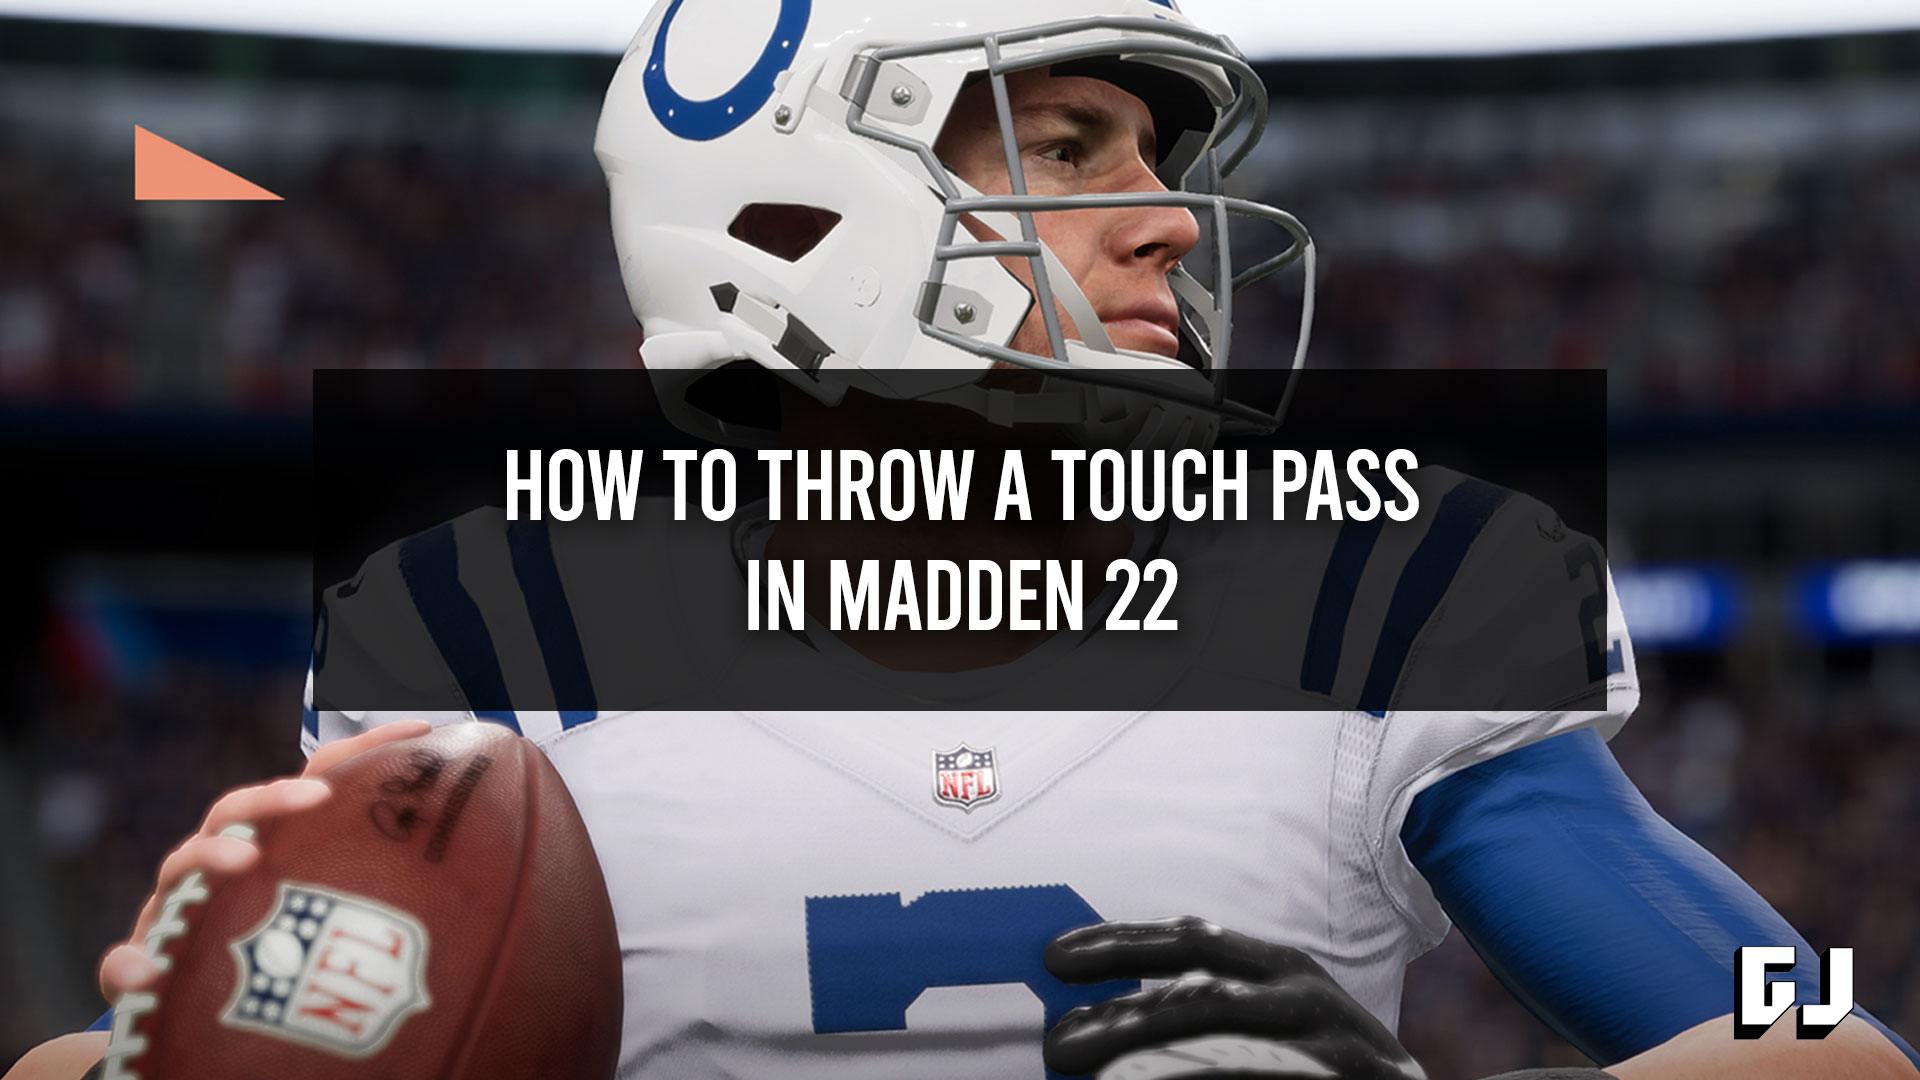 How to throw touch pass madden 23